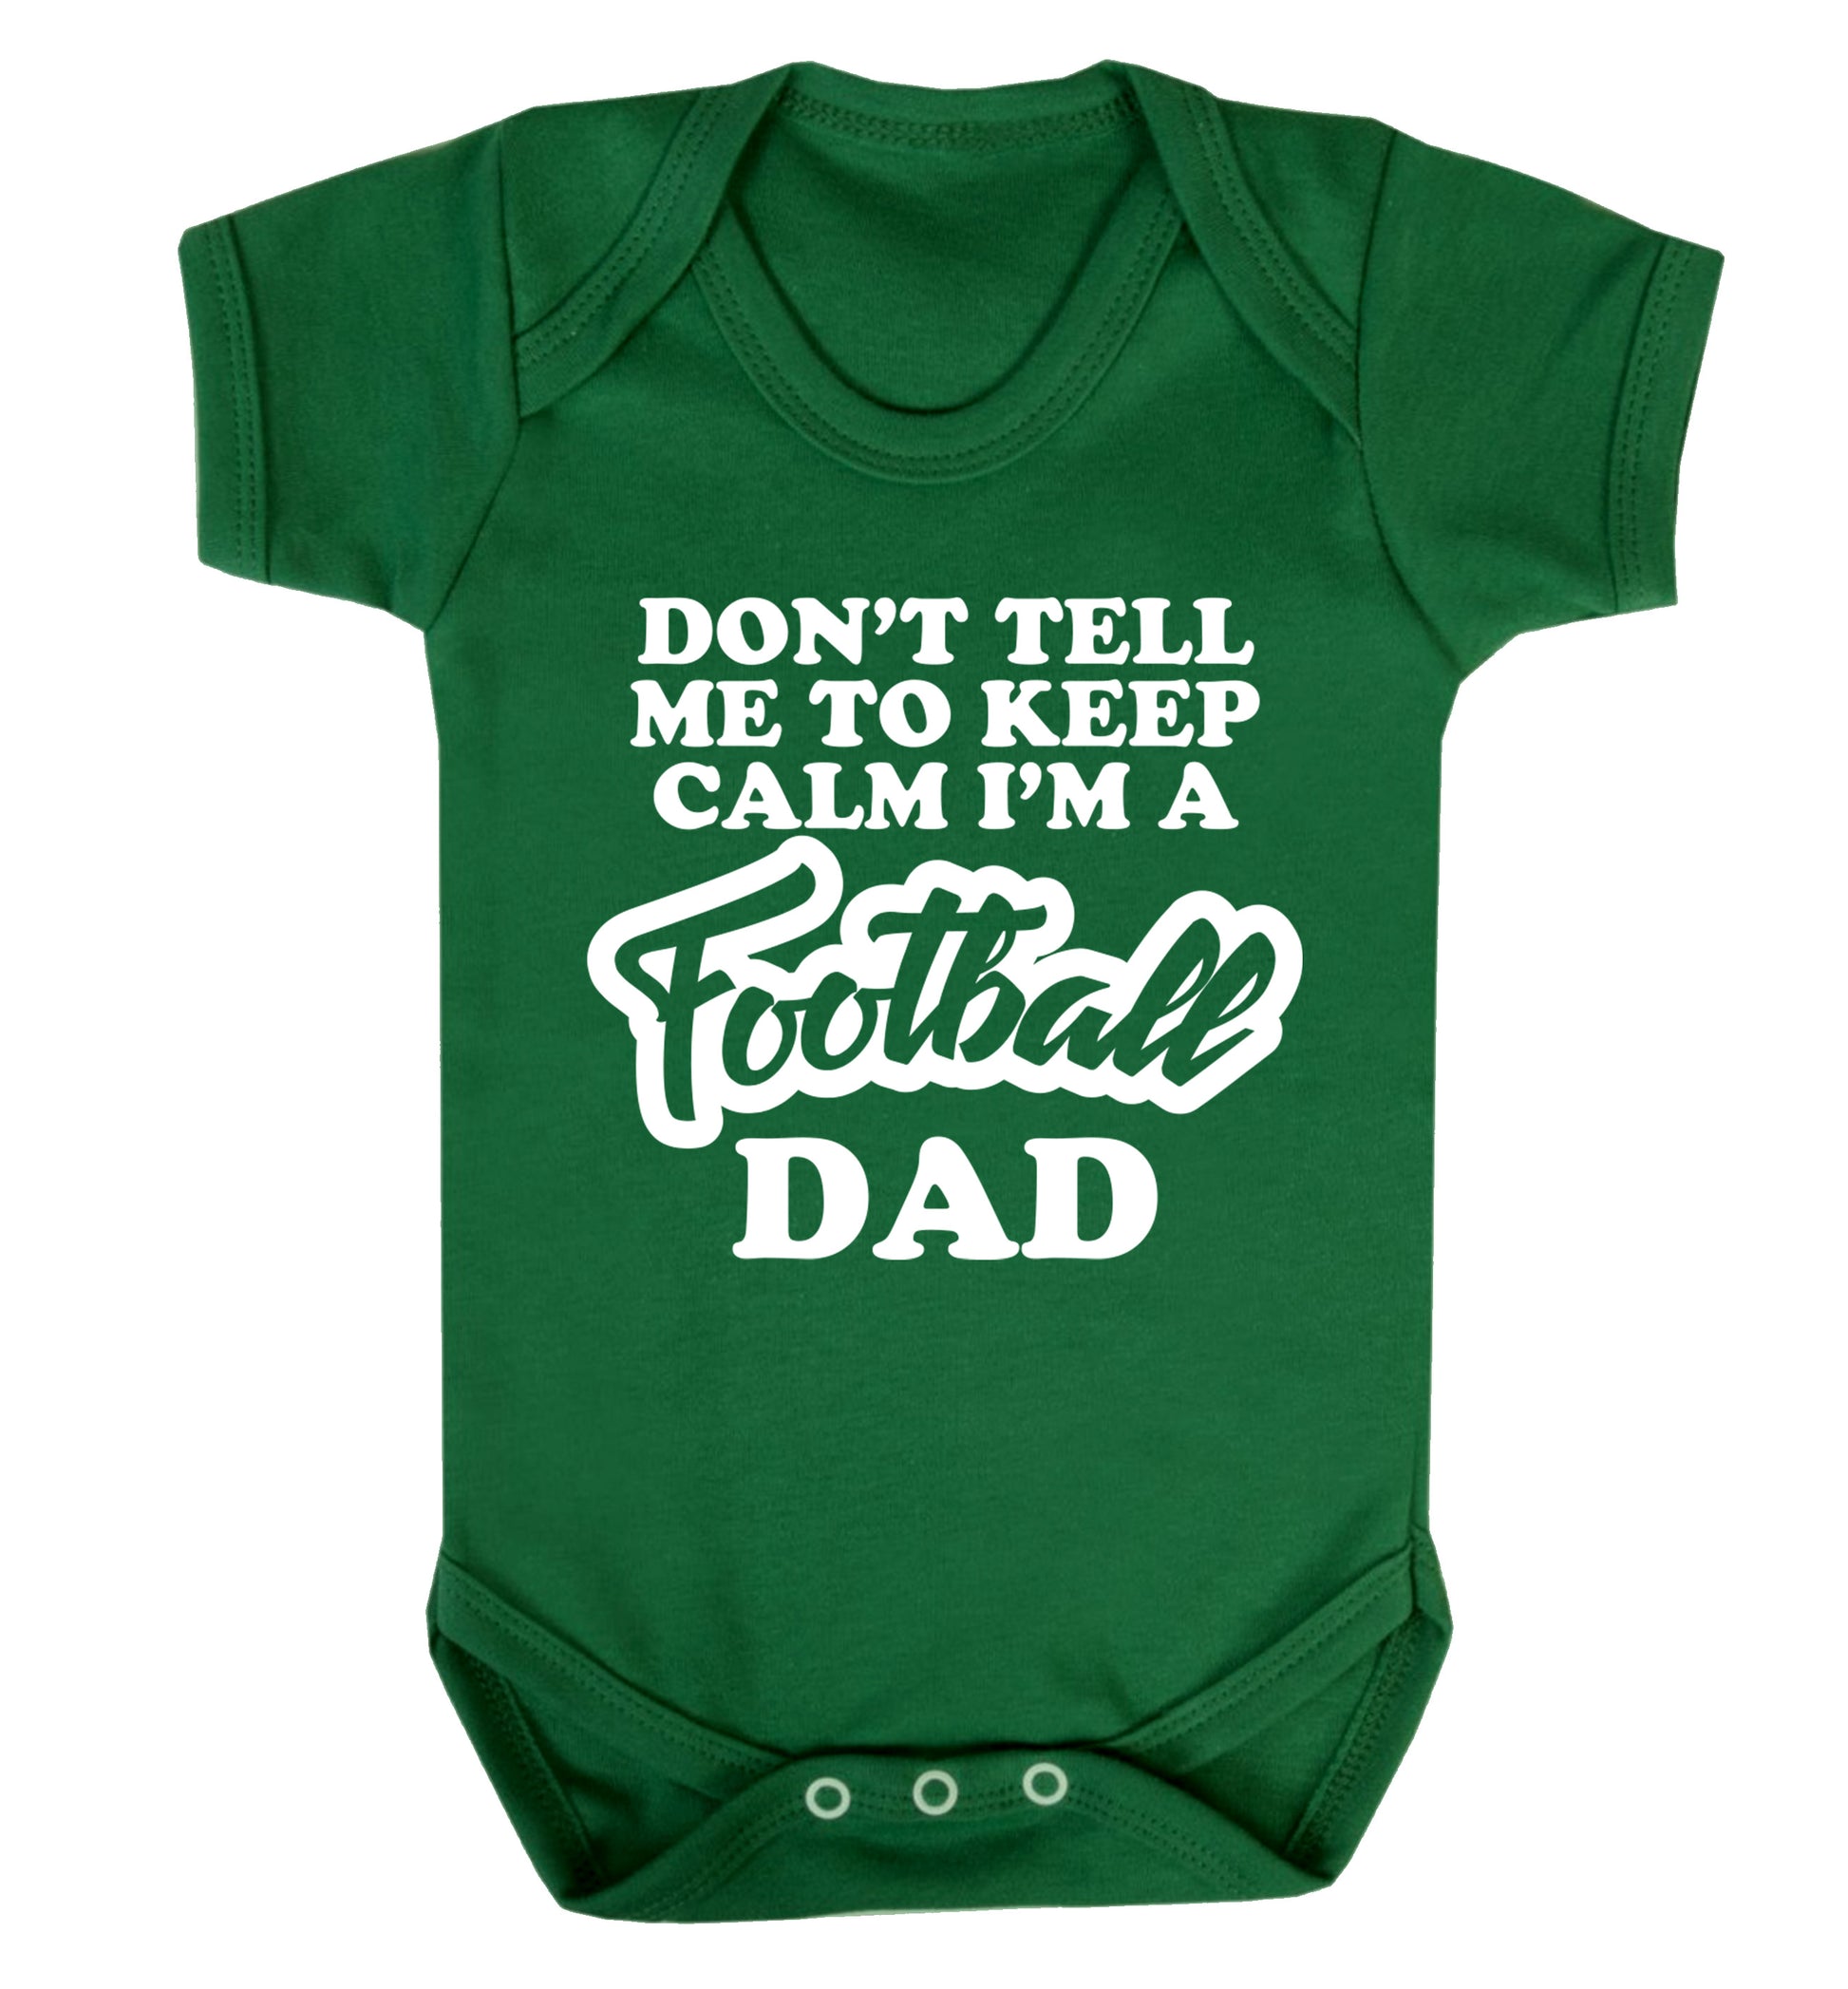 Don't tell me to keep calm I'm a football grandad Baby Vest green 18-24 months